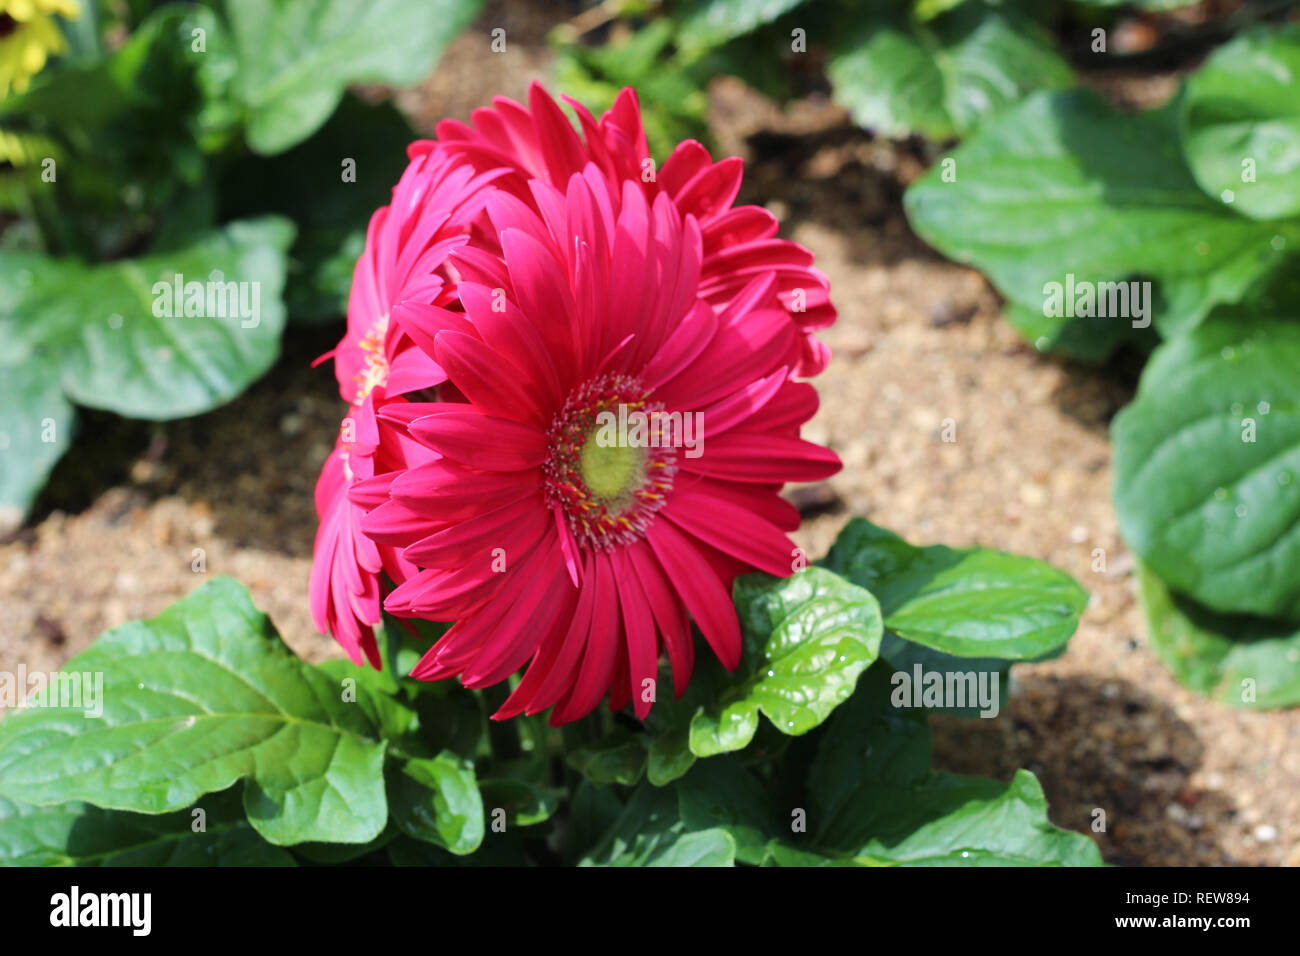 Closeup of a pink Gerbera Daisy, Transvaal Daisy, in full bloom in a rocky garden in the spring Stock Photo